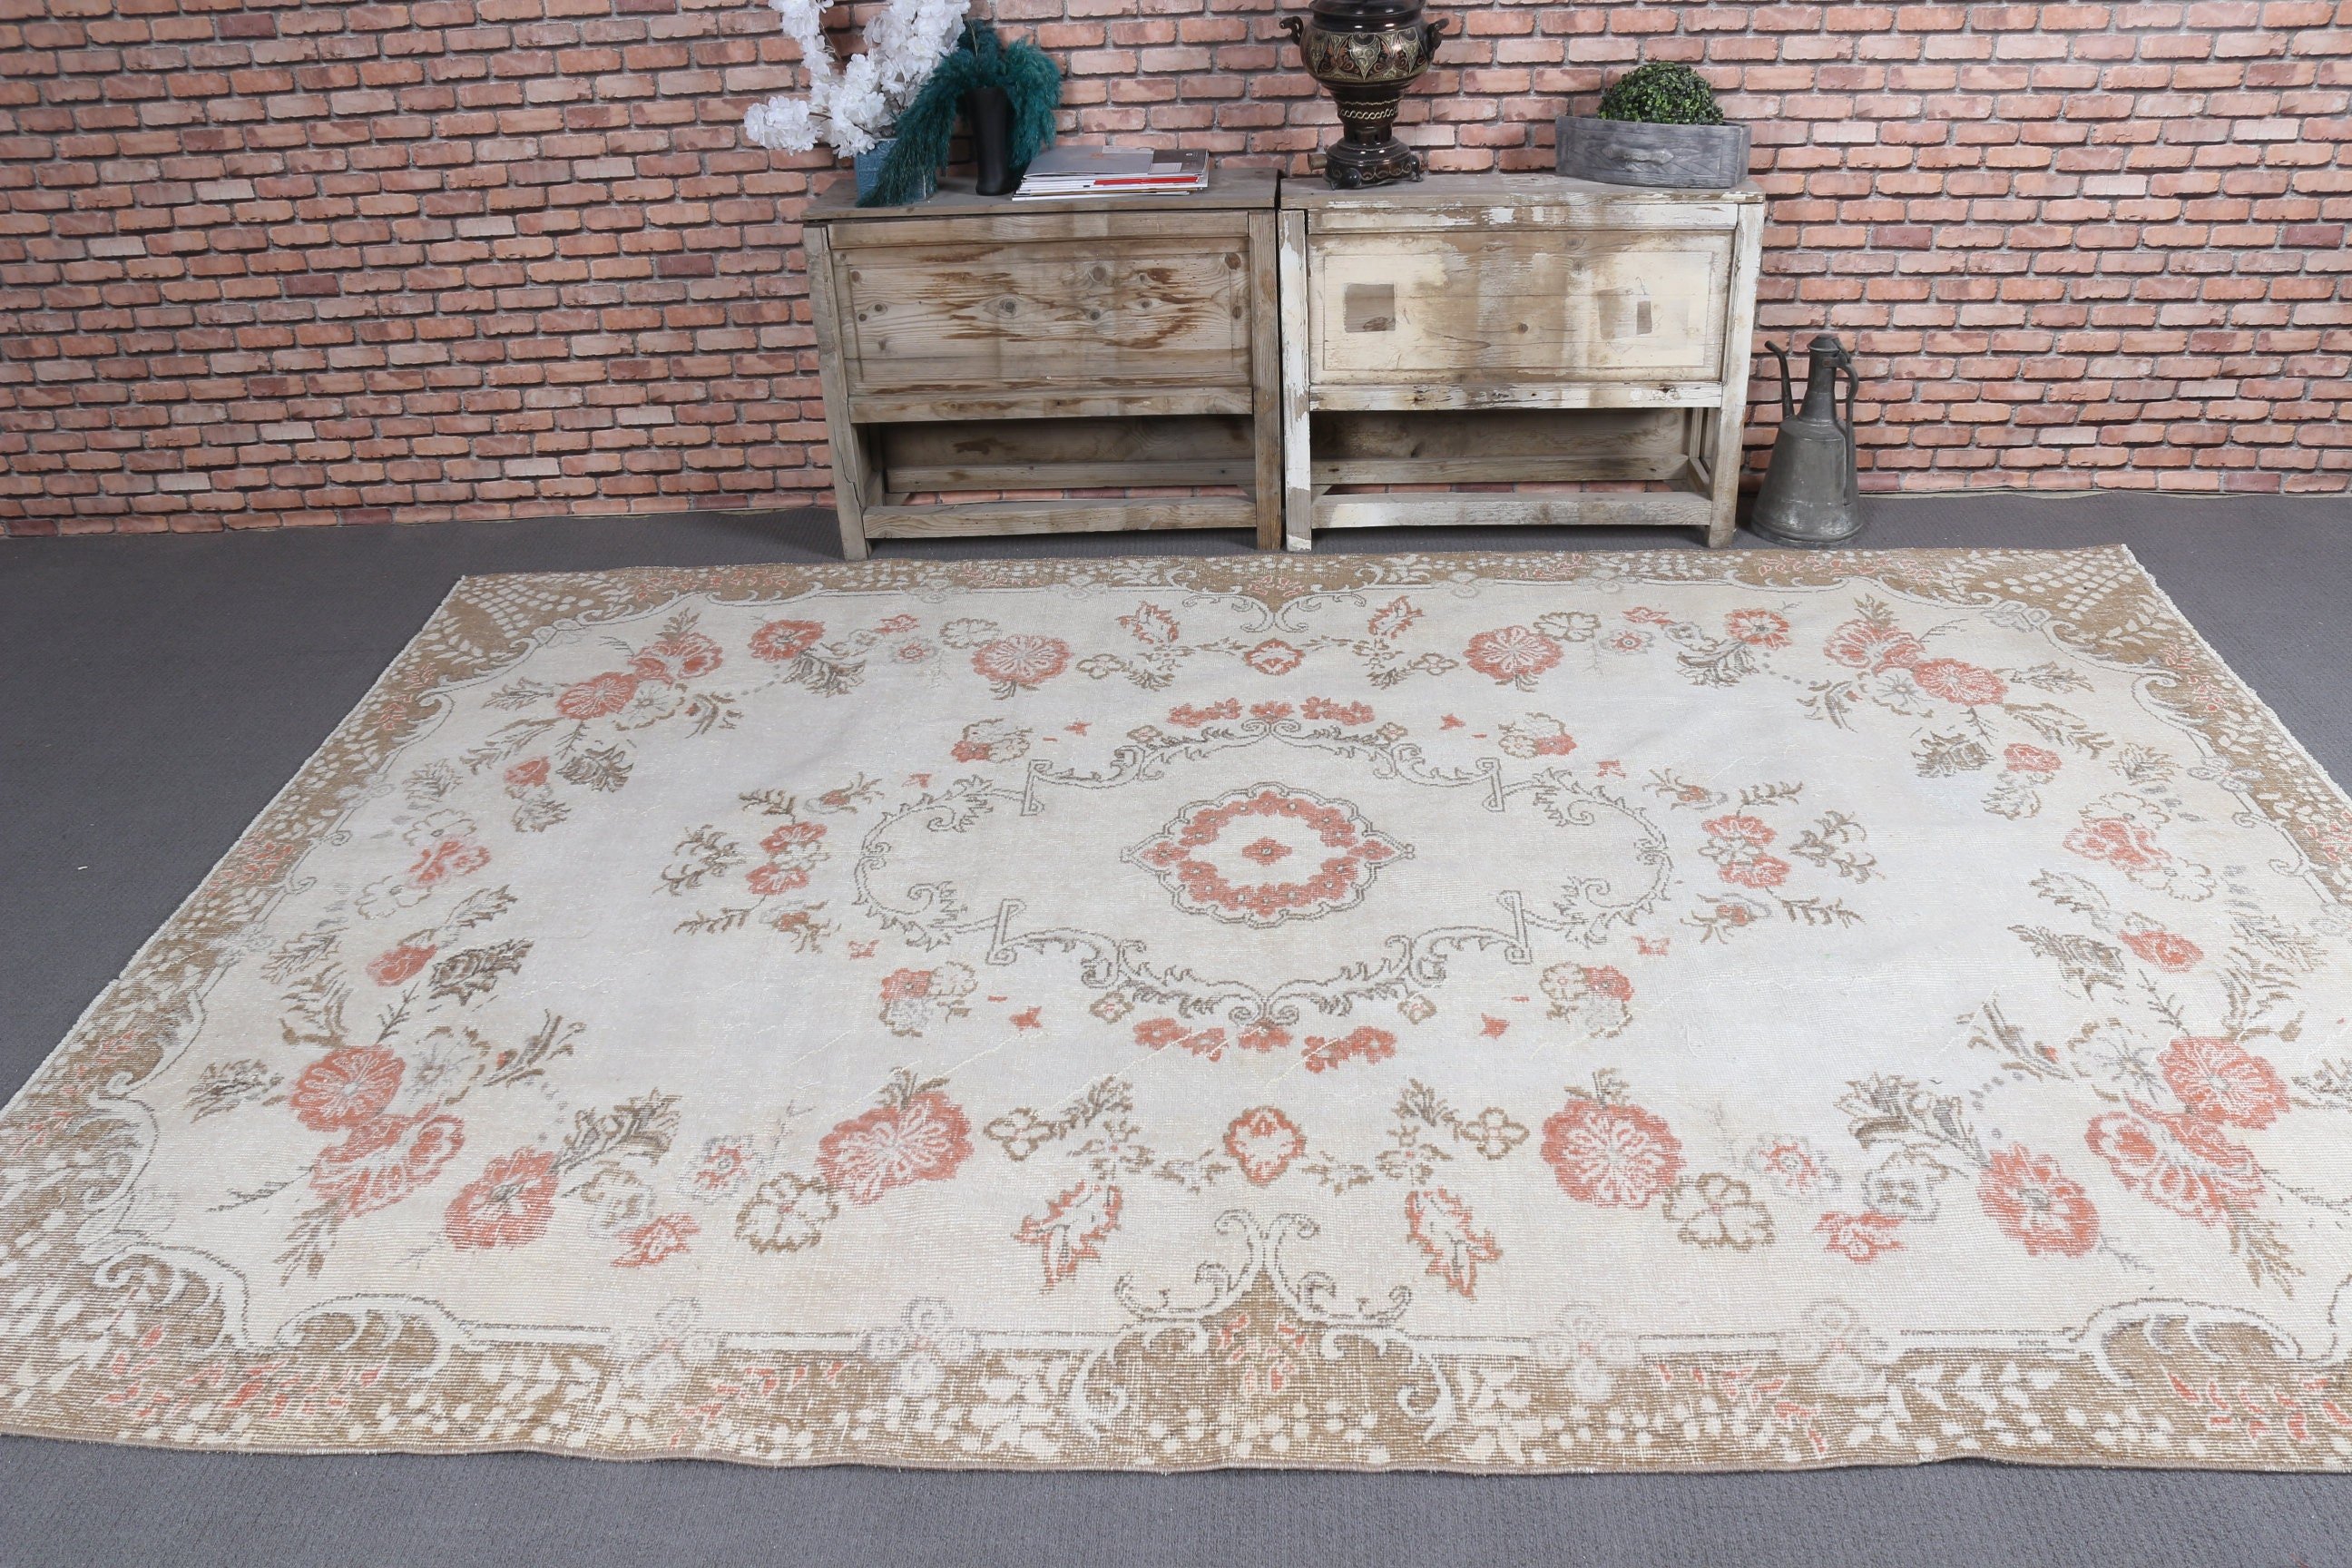 Vintage Rug, Salon Rugs, White Antique Rugs, Rugs for Salon, Turkish Rug, Cool Rugs, Home Decor Rug, Dining Room Rug, 6.7x9.7 ft Large Rug